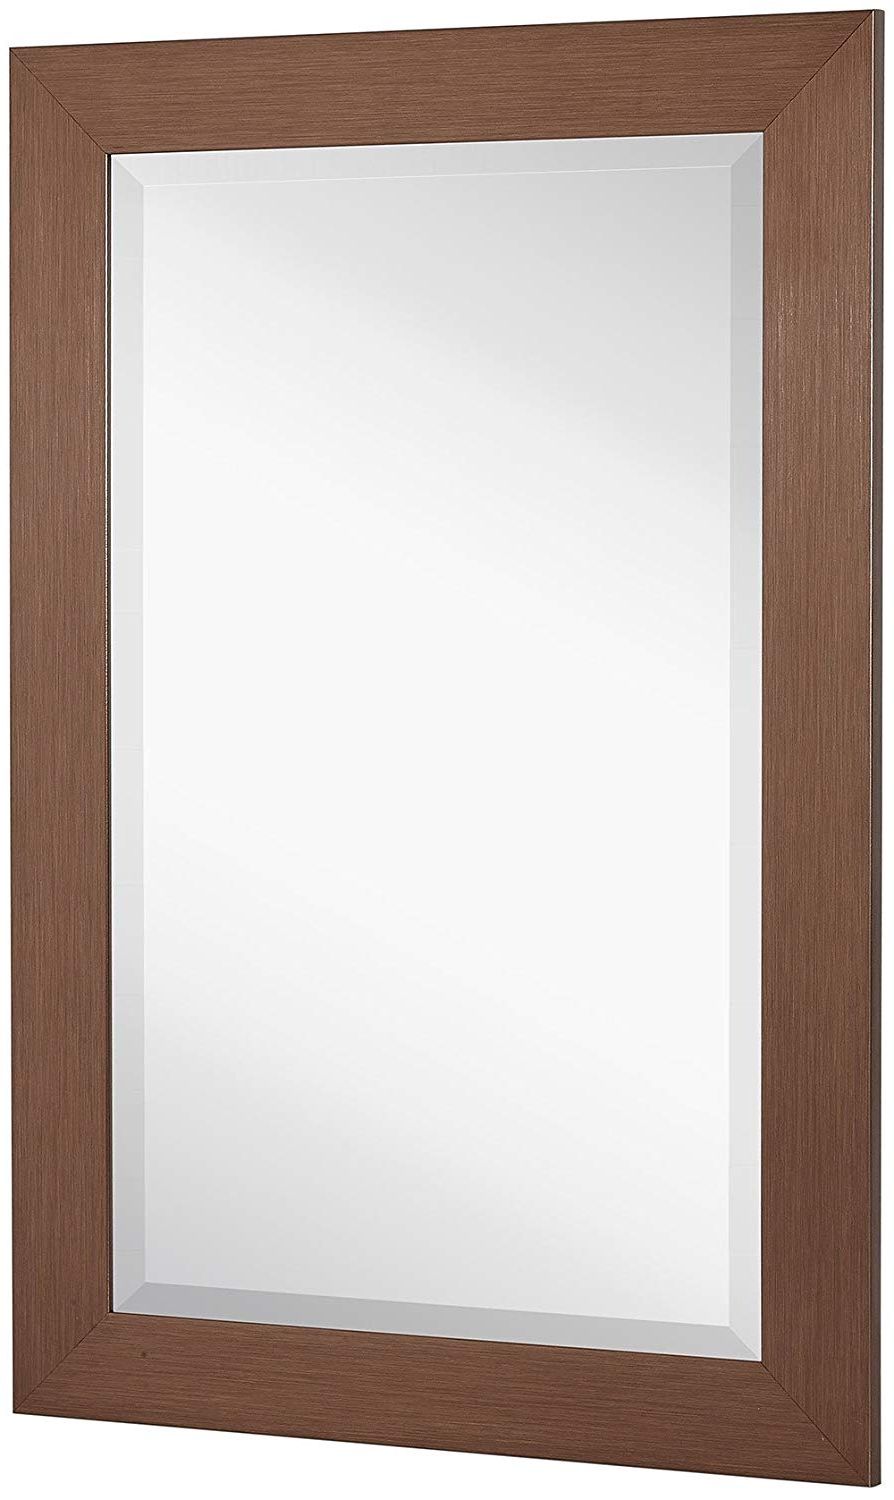 Contemporary Simple Design Beveled Glass Vanity,  Bedroom, Or Pertaining To Most Up To Date Modern & Contemporary Beveled Wall Mirrors (View 19 of 20)